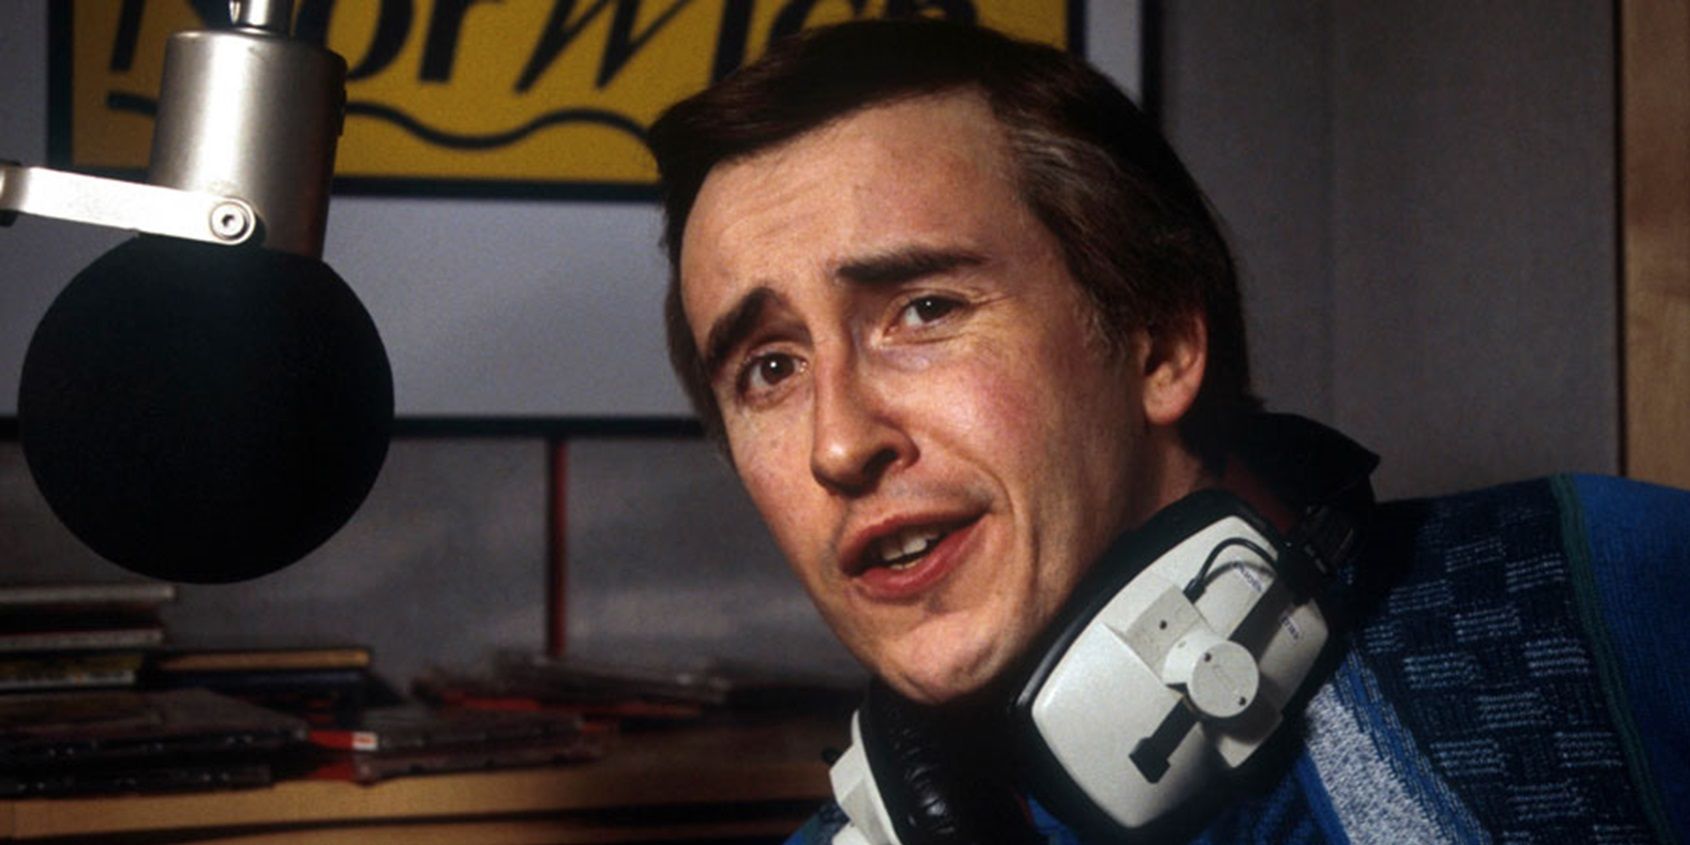 Alan sitting in a recording booth in I'm Alan Partridge